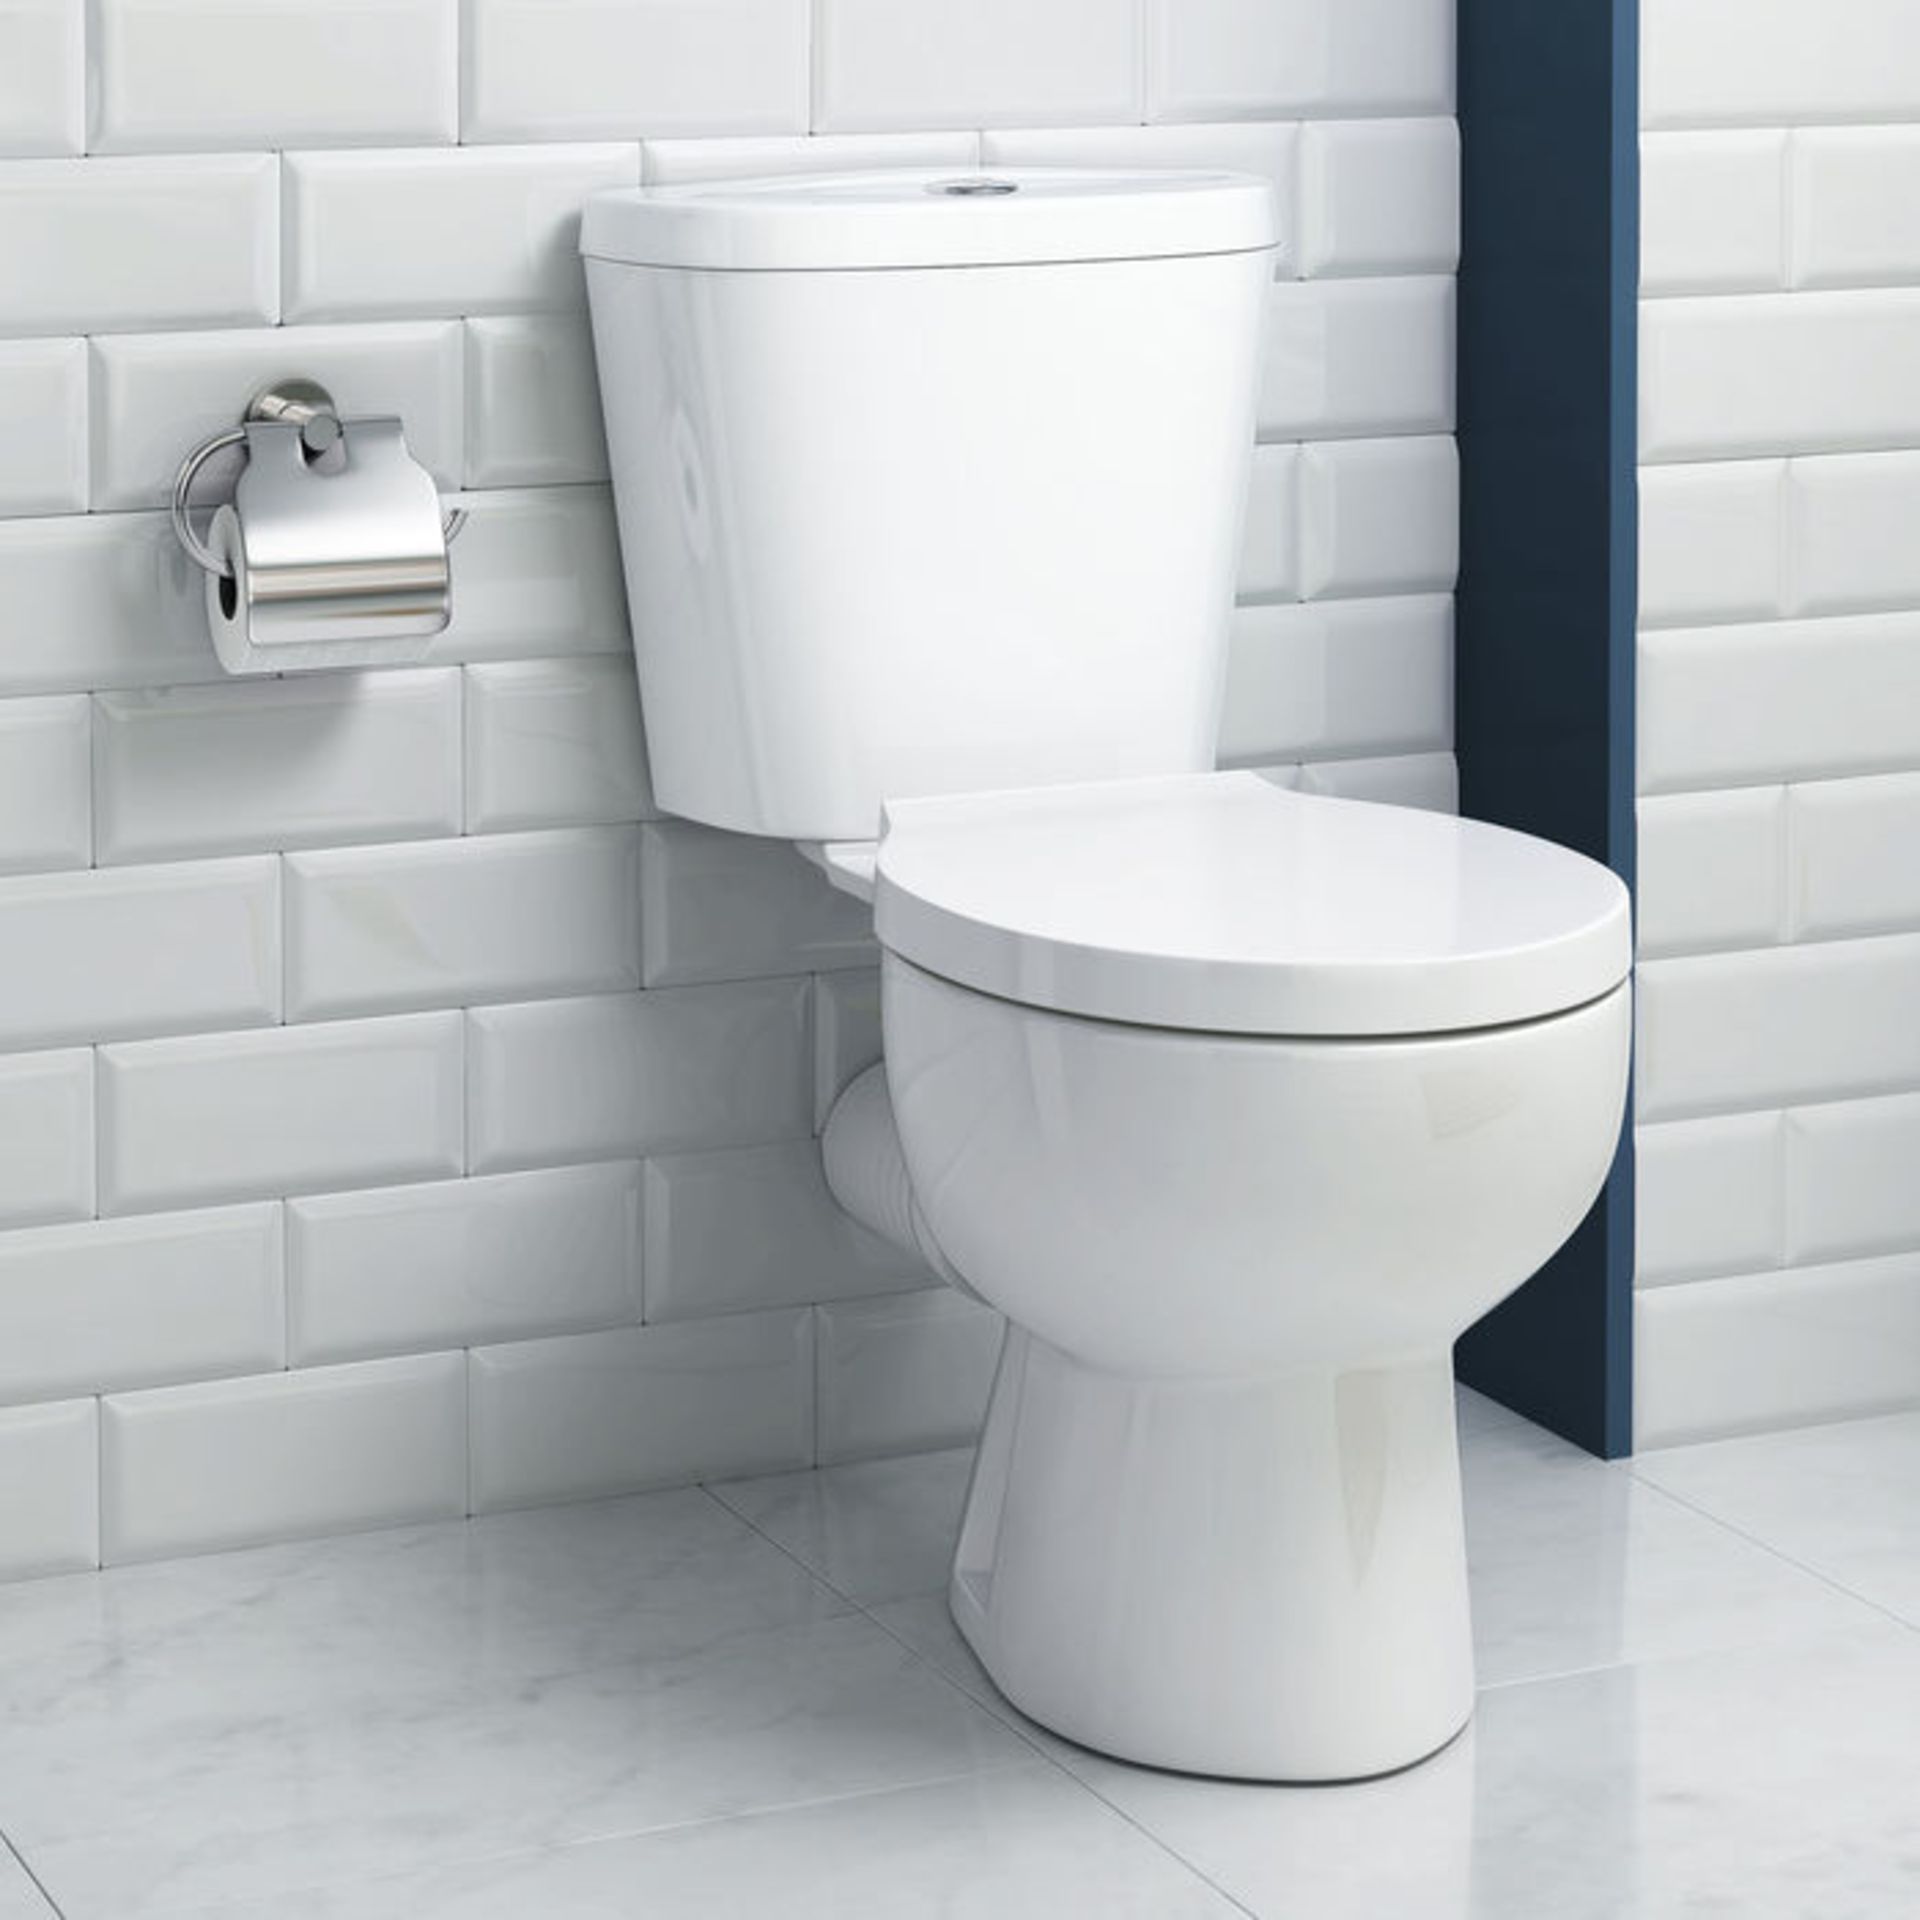 (AA141) Quartz Close Coupled Toilet.. We love this because it is simply great value! Made from ...